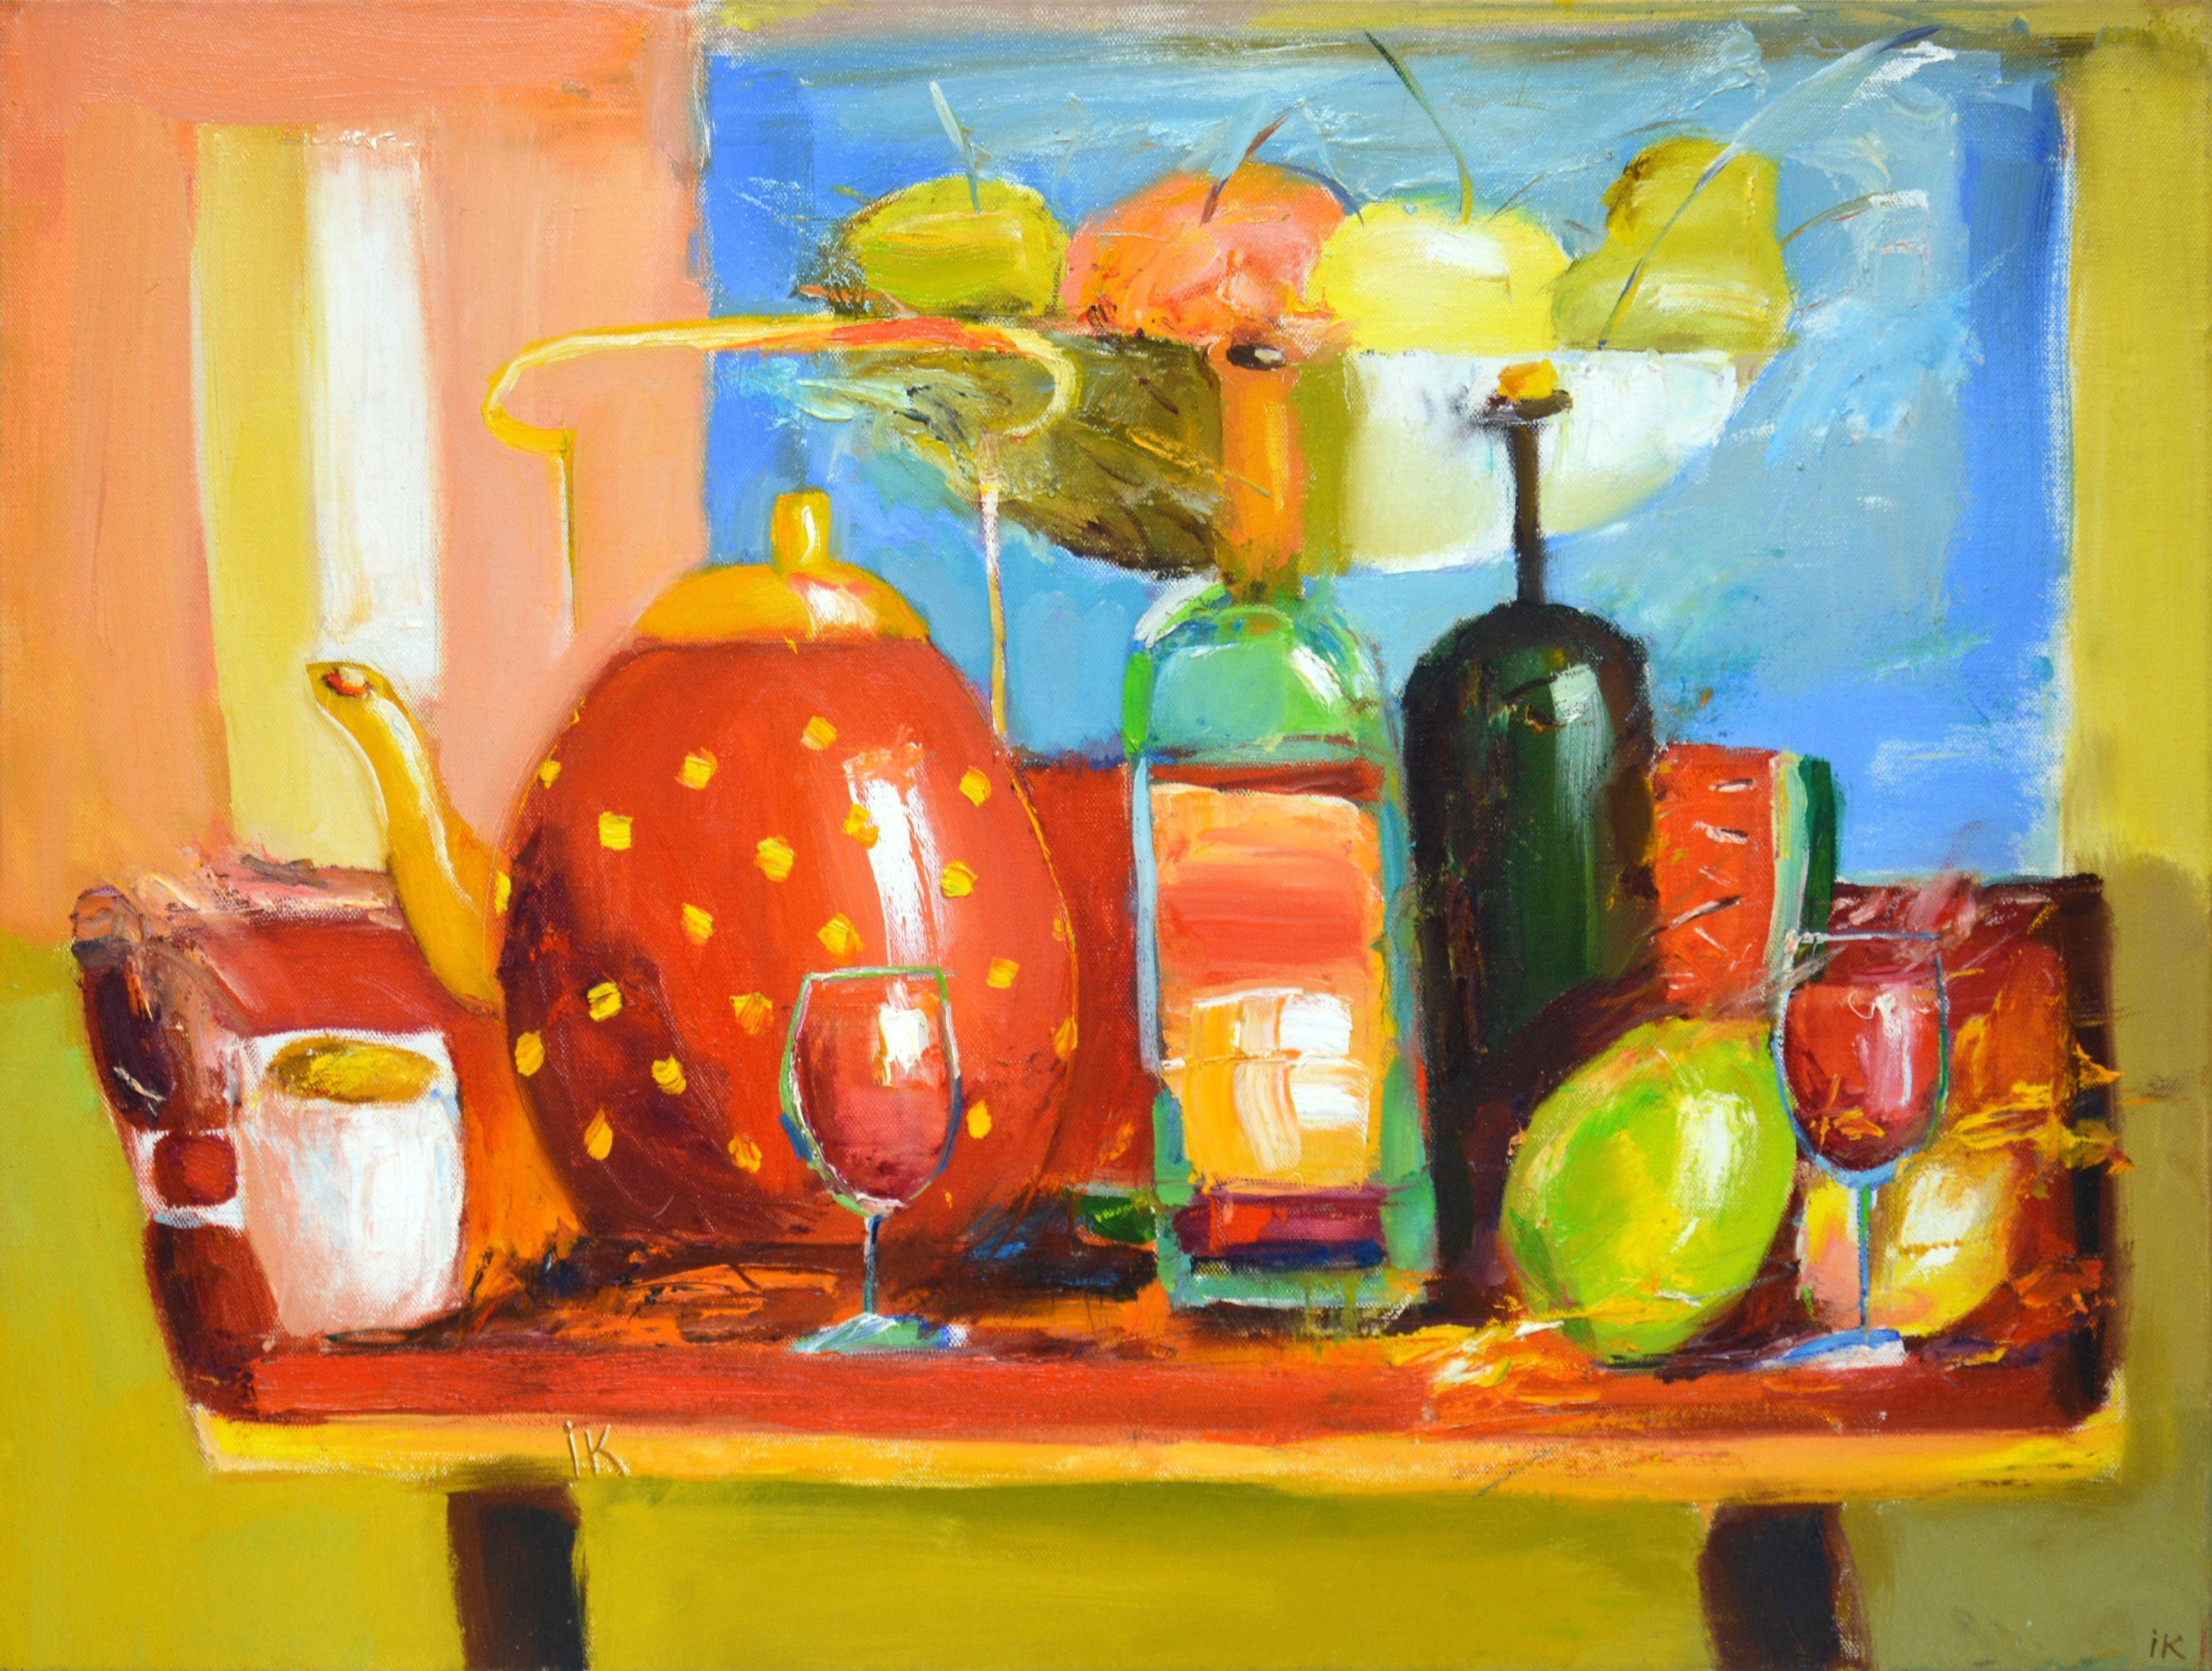 A bright, expressive, modern still life with a red teapot with polka dots, bottles of wine, glasses, fruits on the table. Oil painting. Artist's signature, varnished. Ready to hang. Certificate of Authenticity. :: Painting :: Modern :: This piece